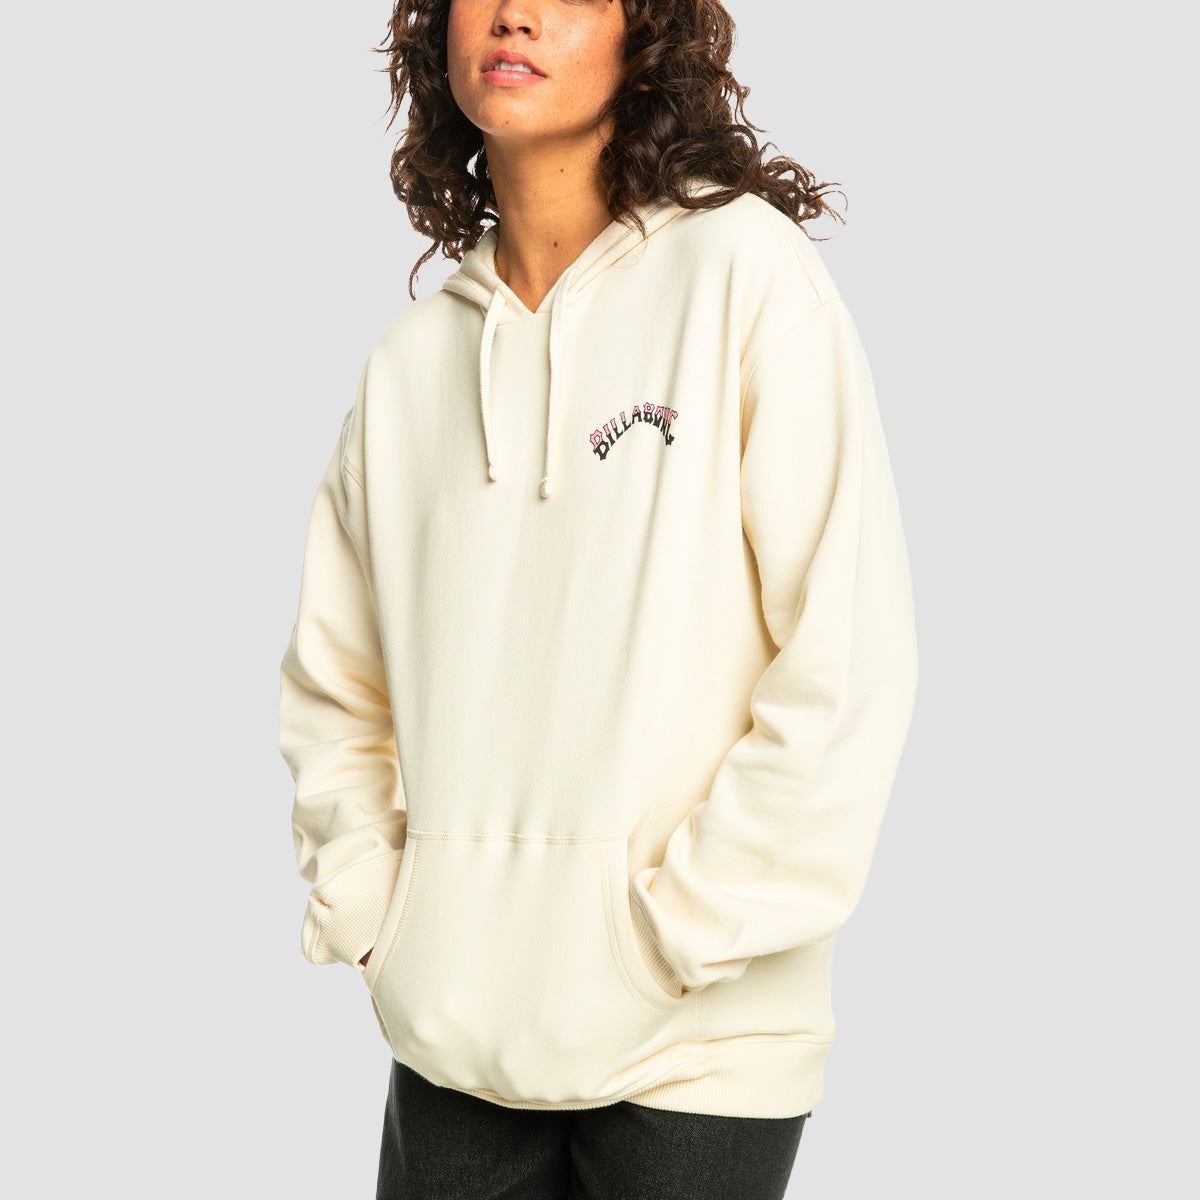 Billabong Search For Stoke Pullover Hoodie Antique White - Womens